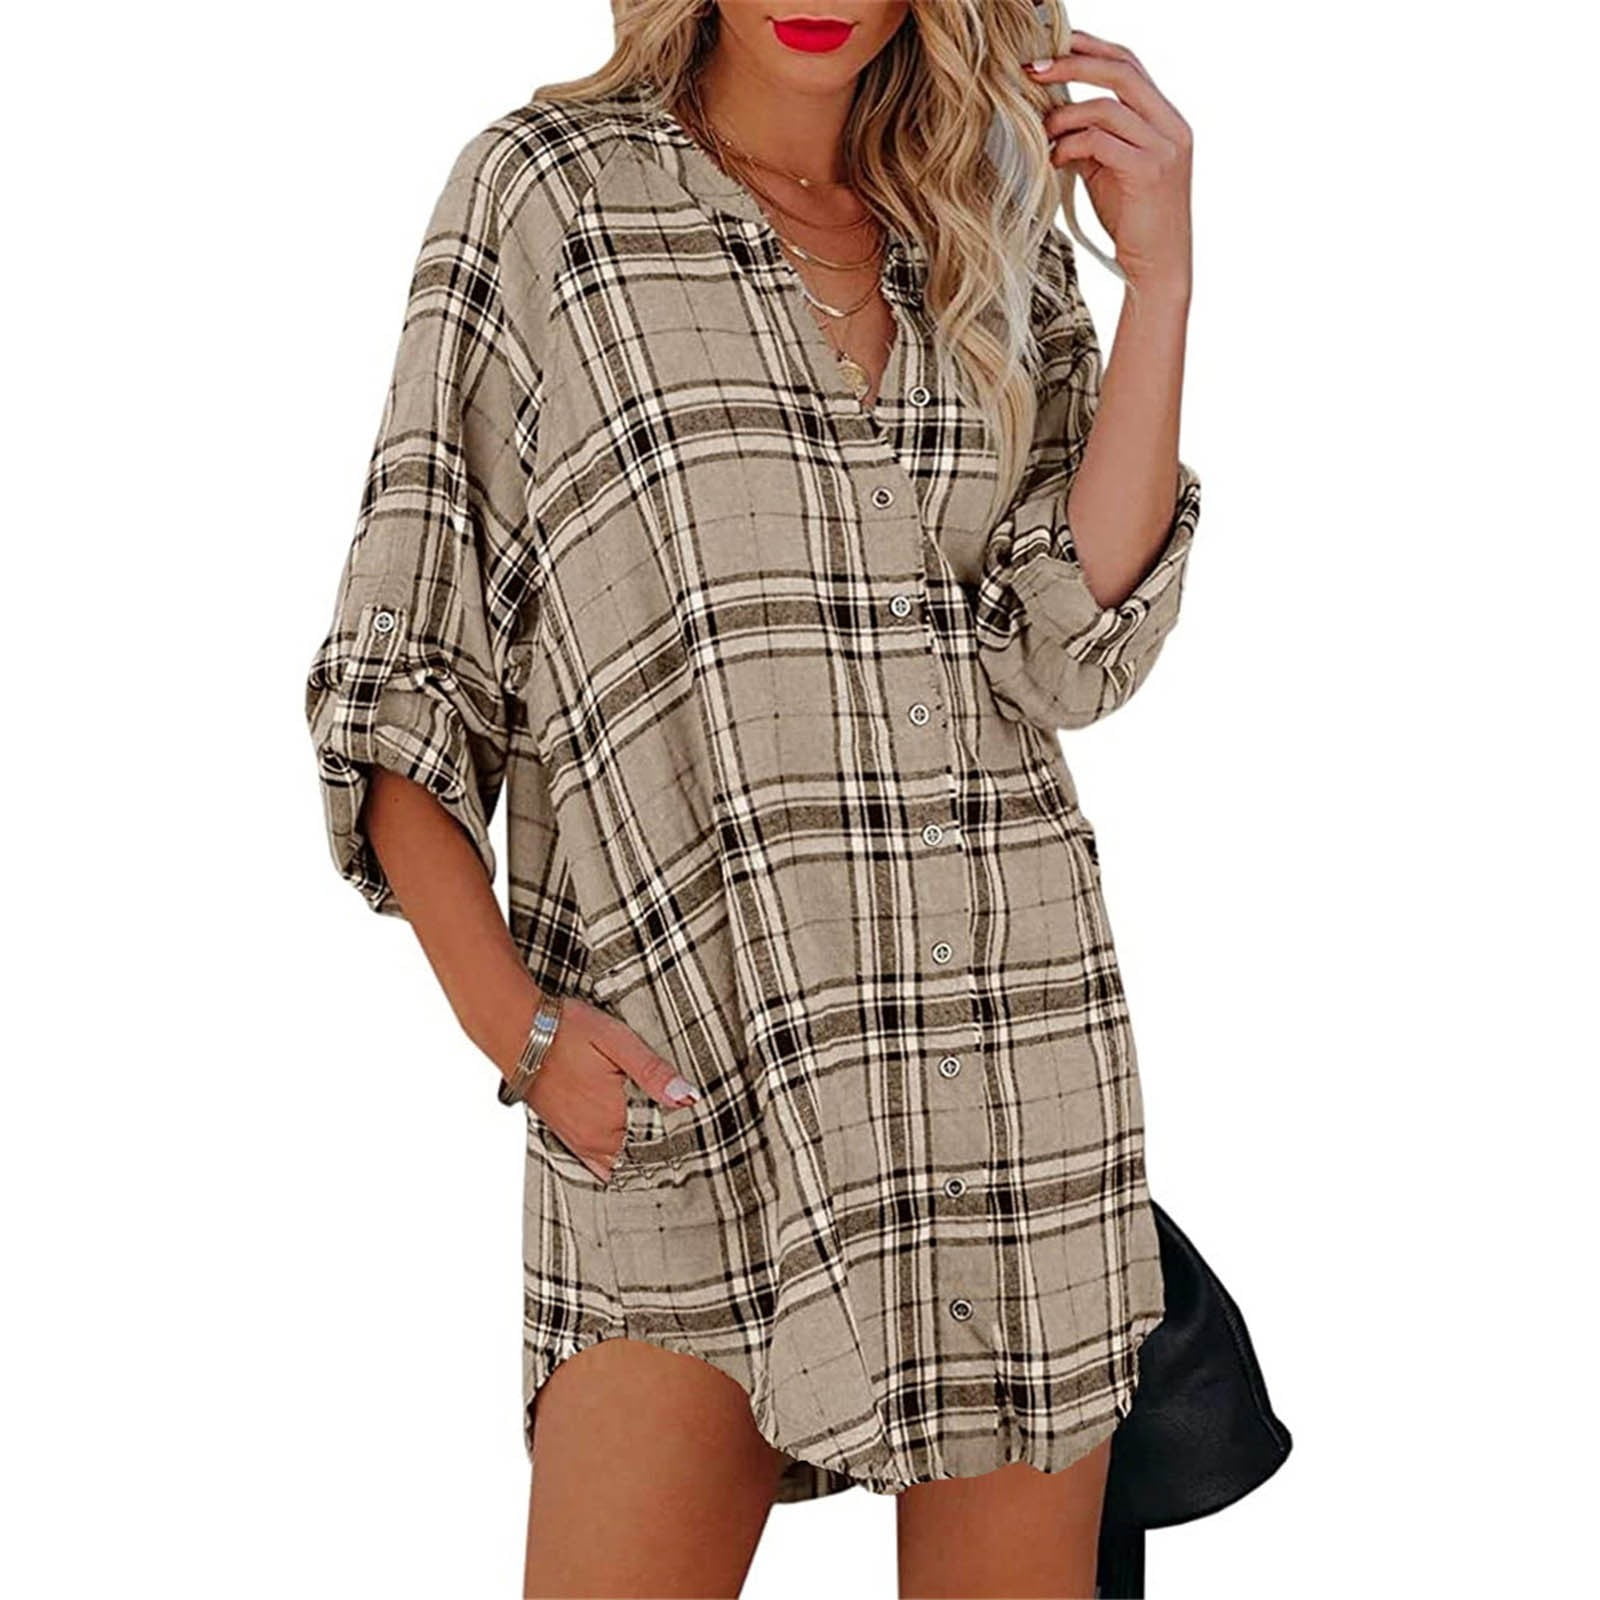 Short-sleeved plaid dress with fitted high-waist button decoration